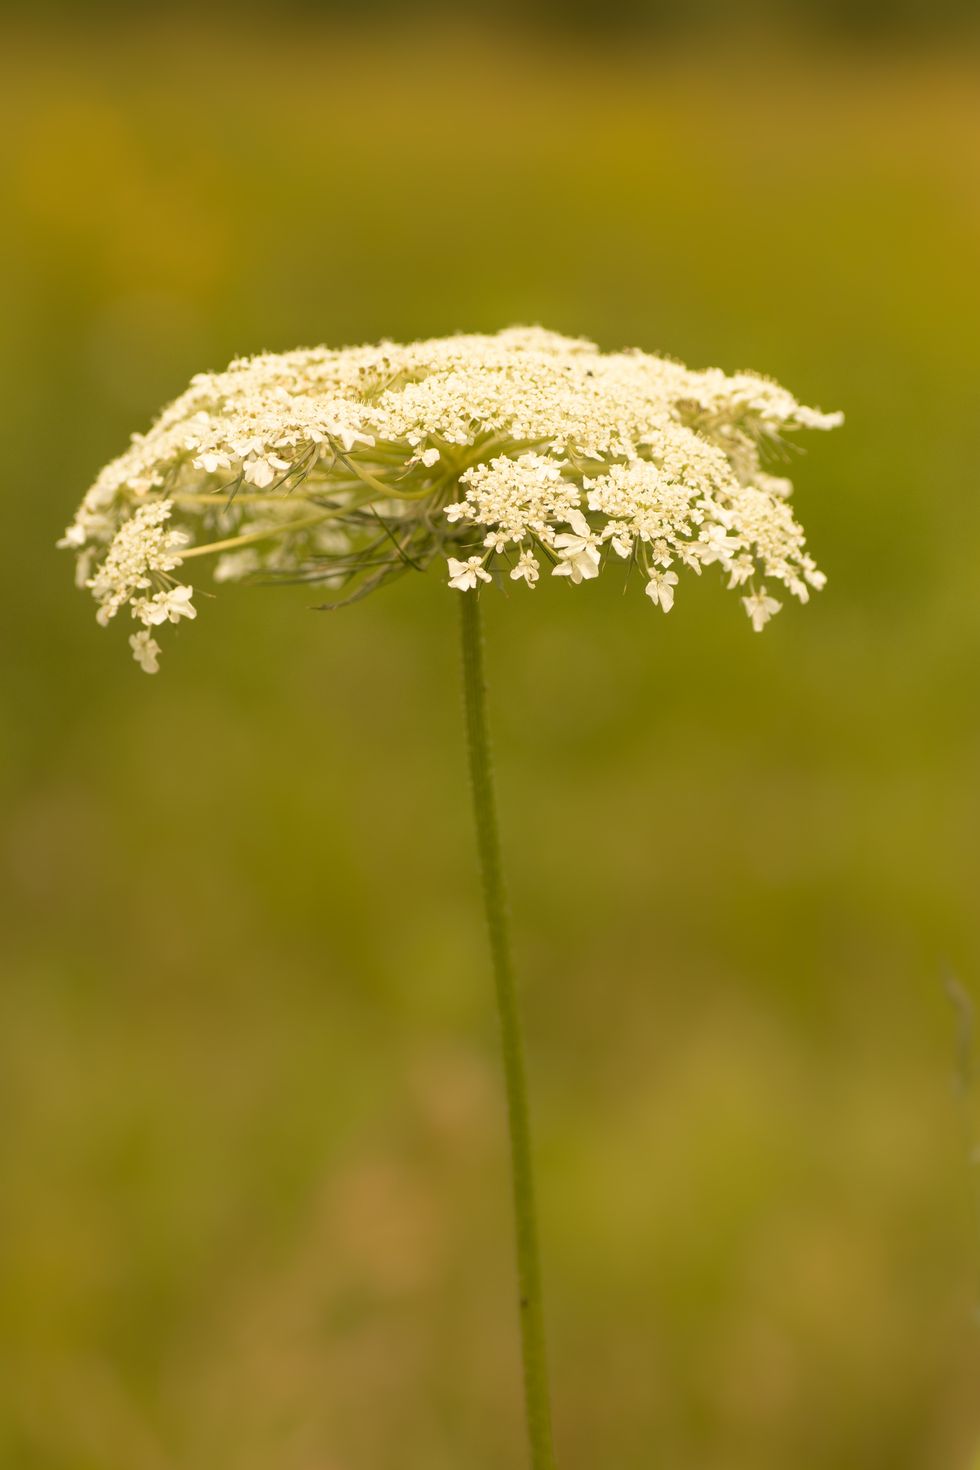 close up image of a queen anne’s lace flower on a defocused green background